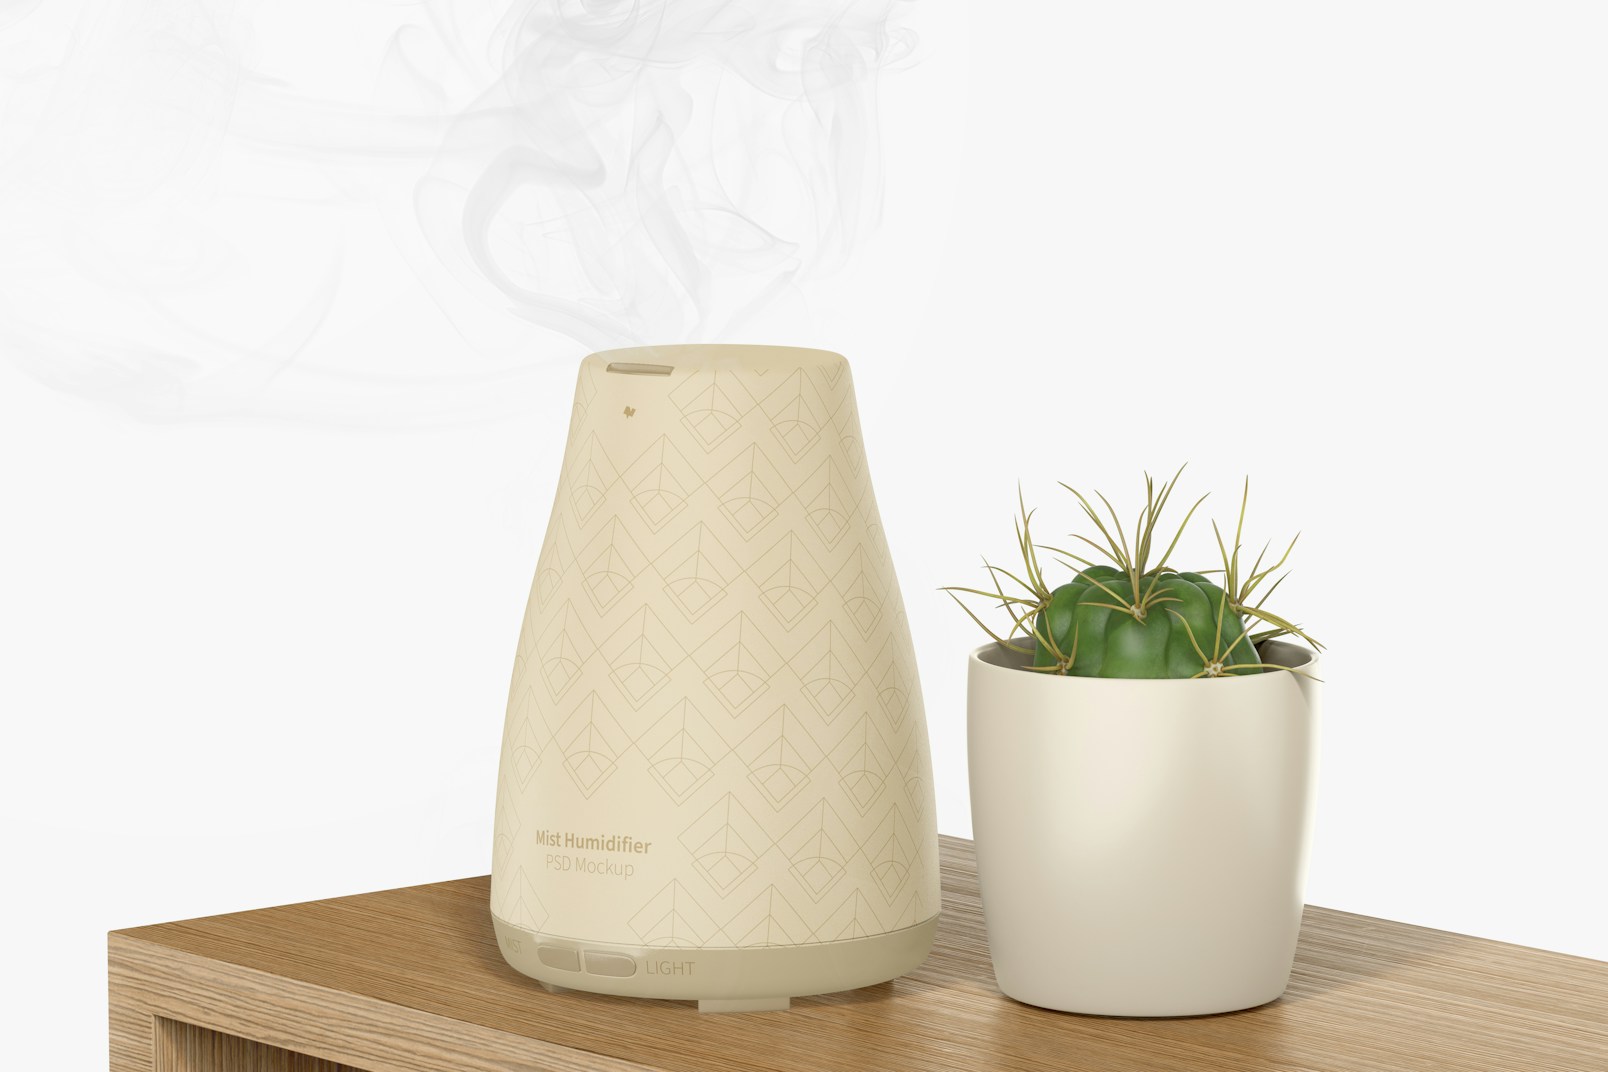 Mist Humidifier with Plant Pot Mockup